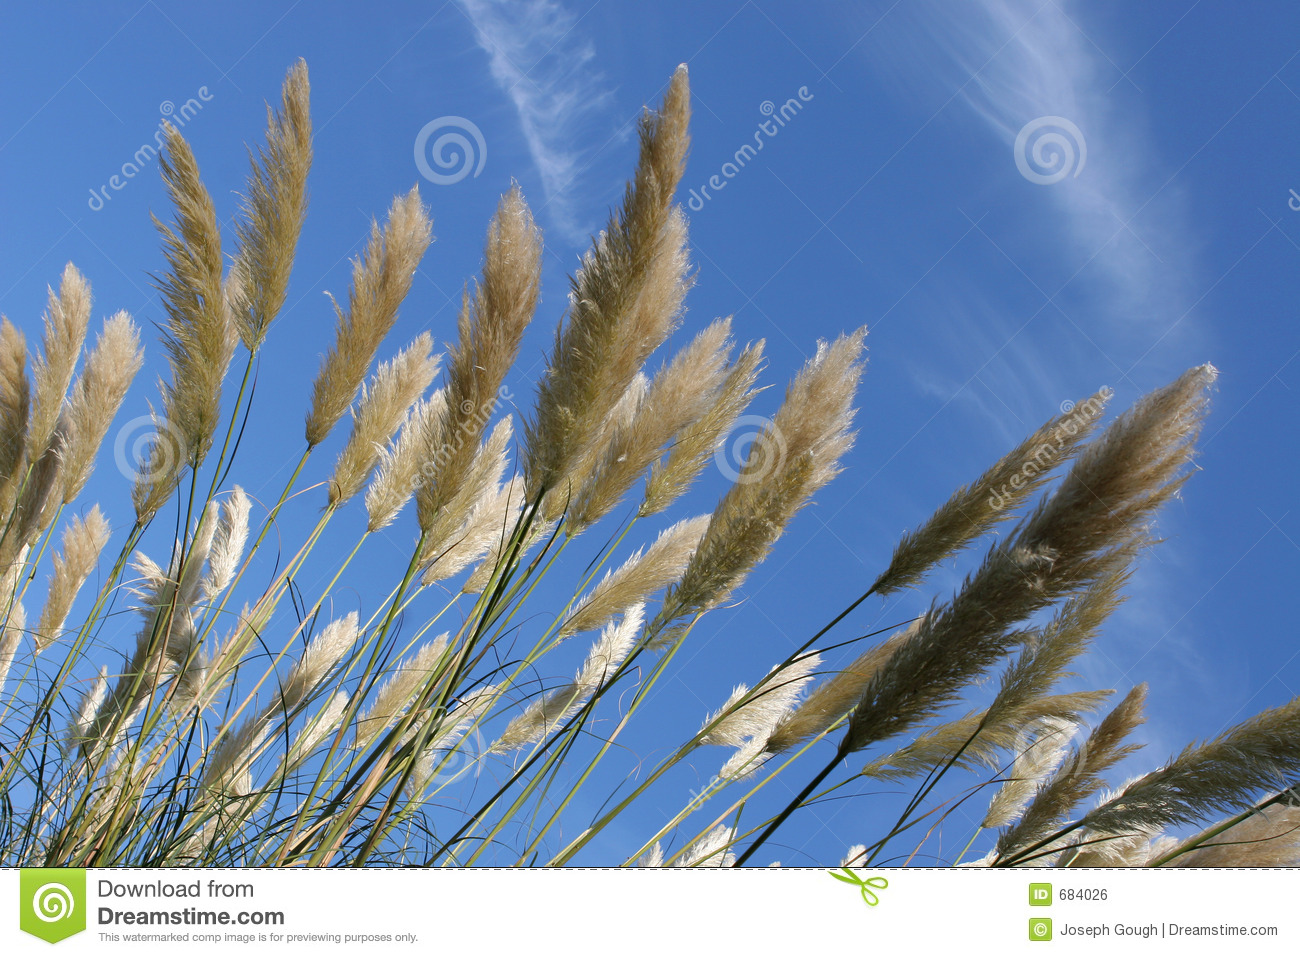 Pampas Grass clipart #16, Download drawings